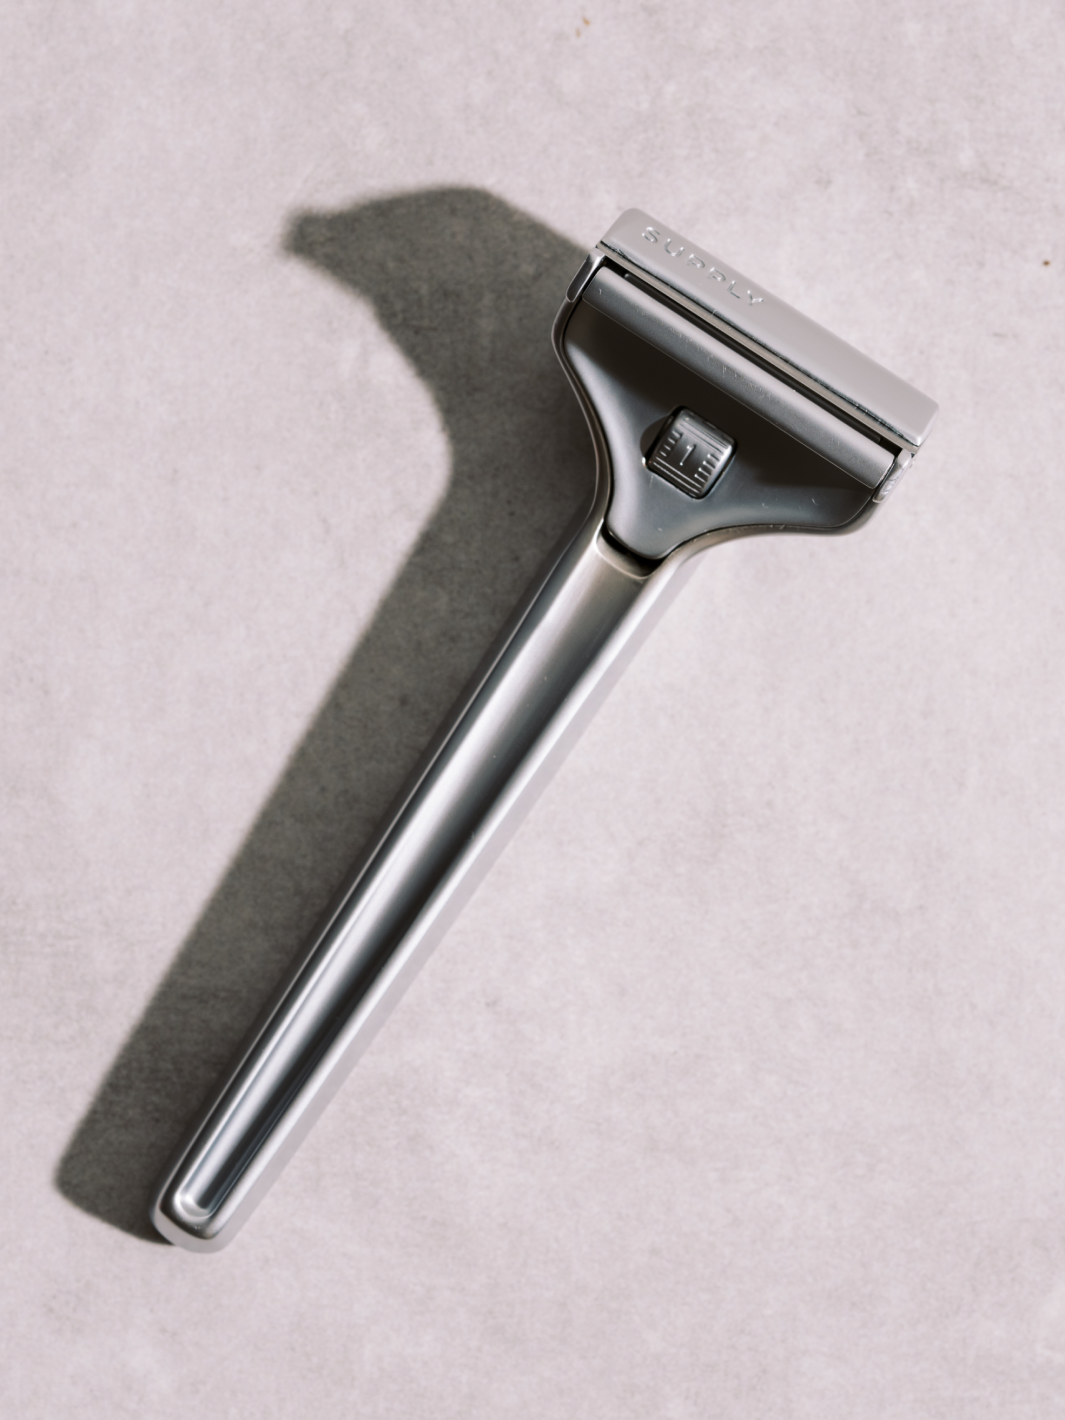 What Happened To Supply Razor After Shark Tank?  Single edge razor,  Grooming kit, Personal grooming